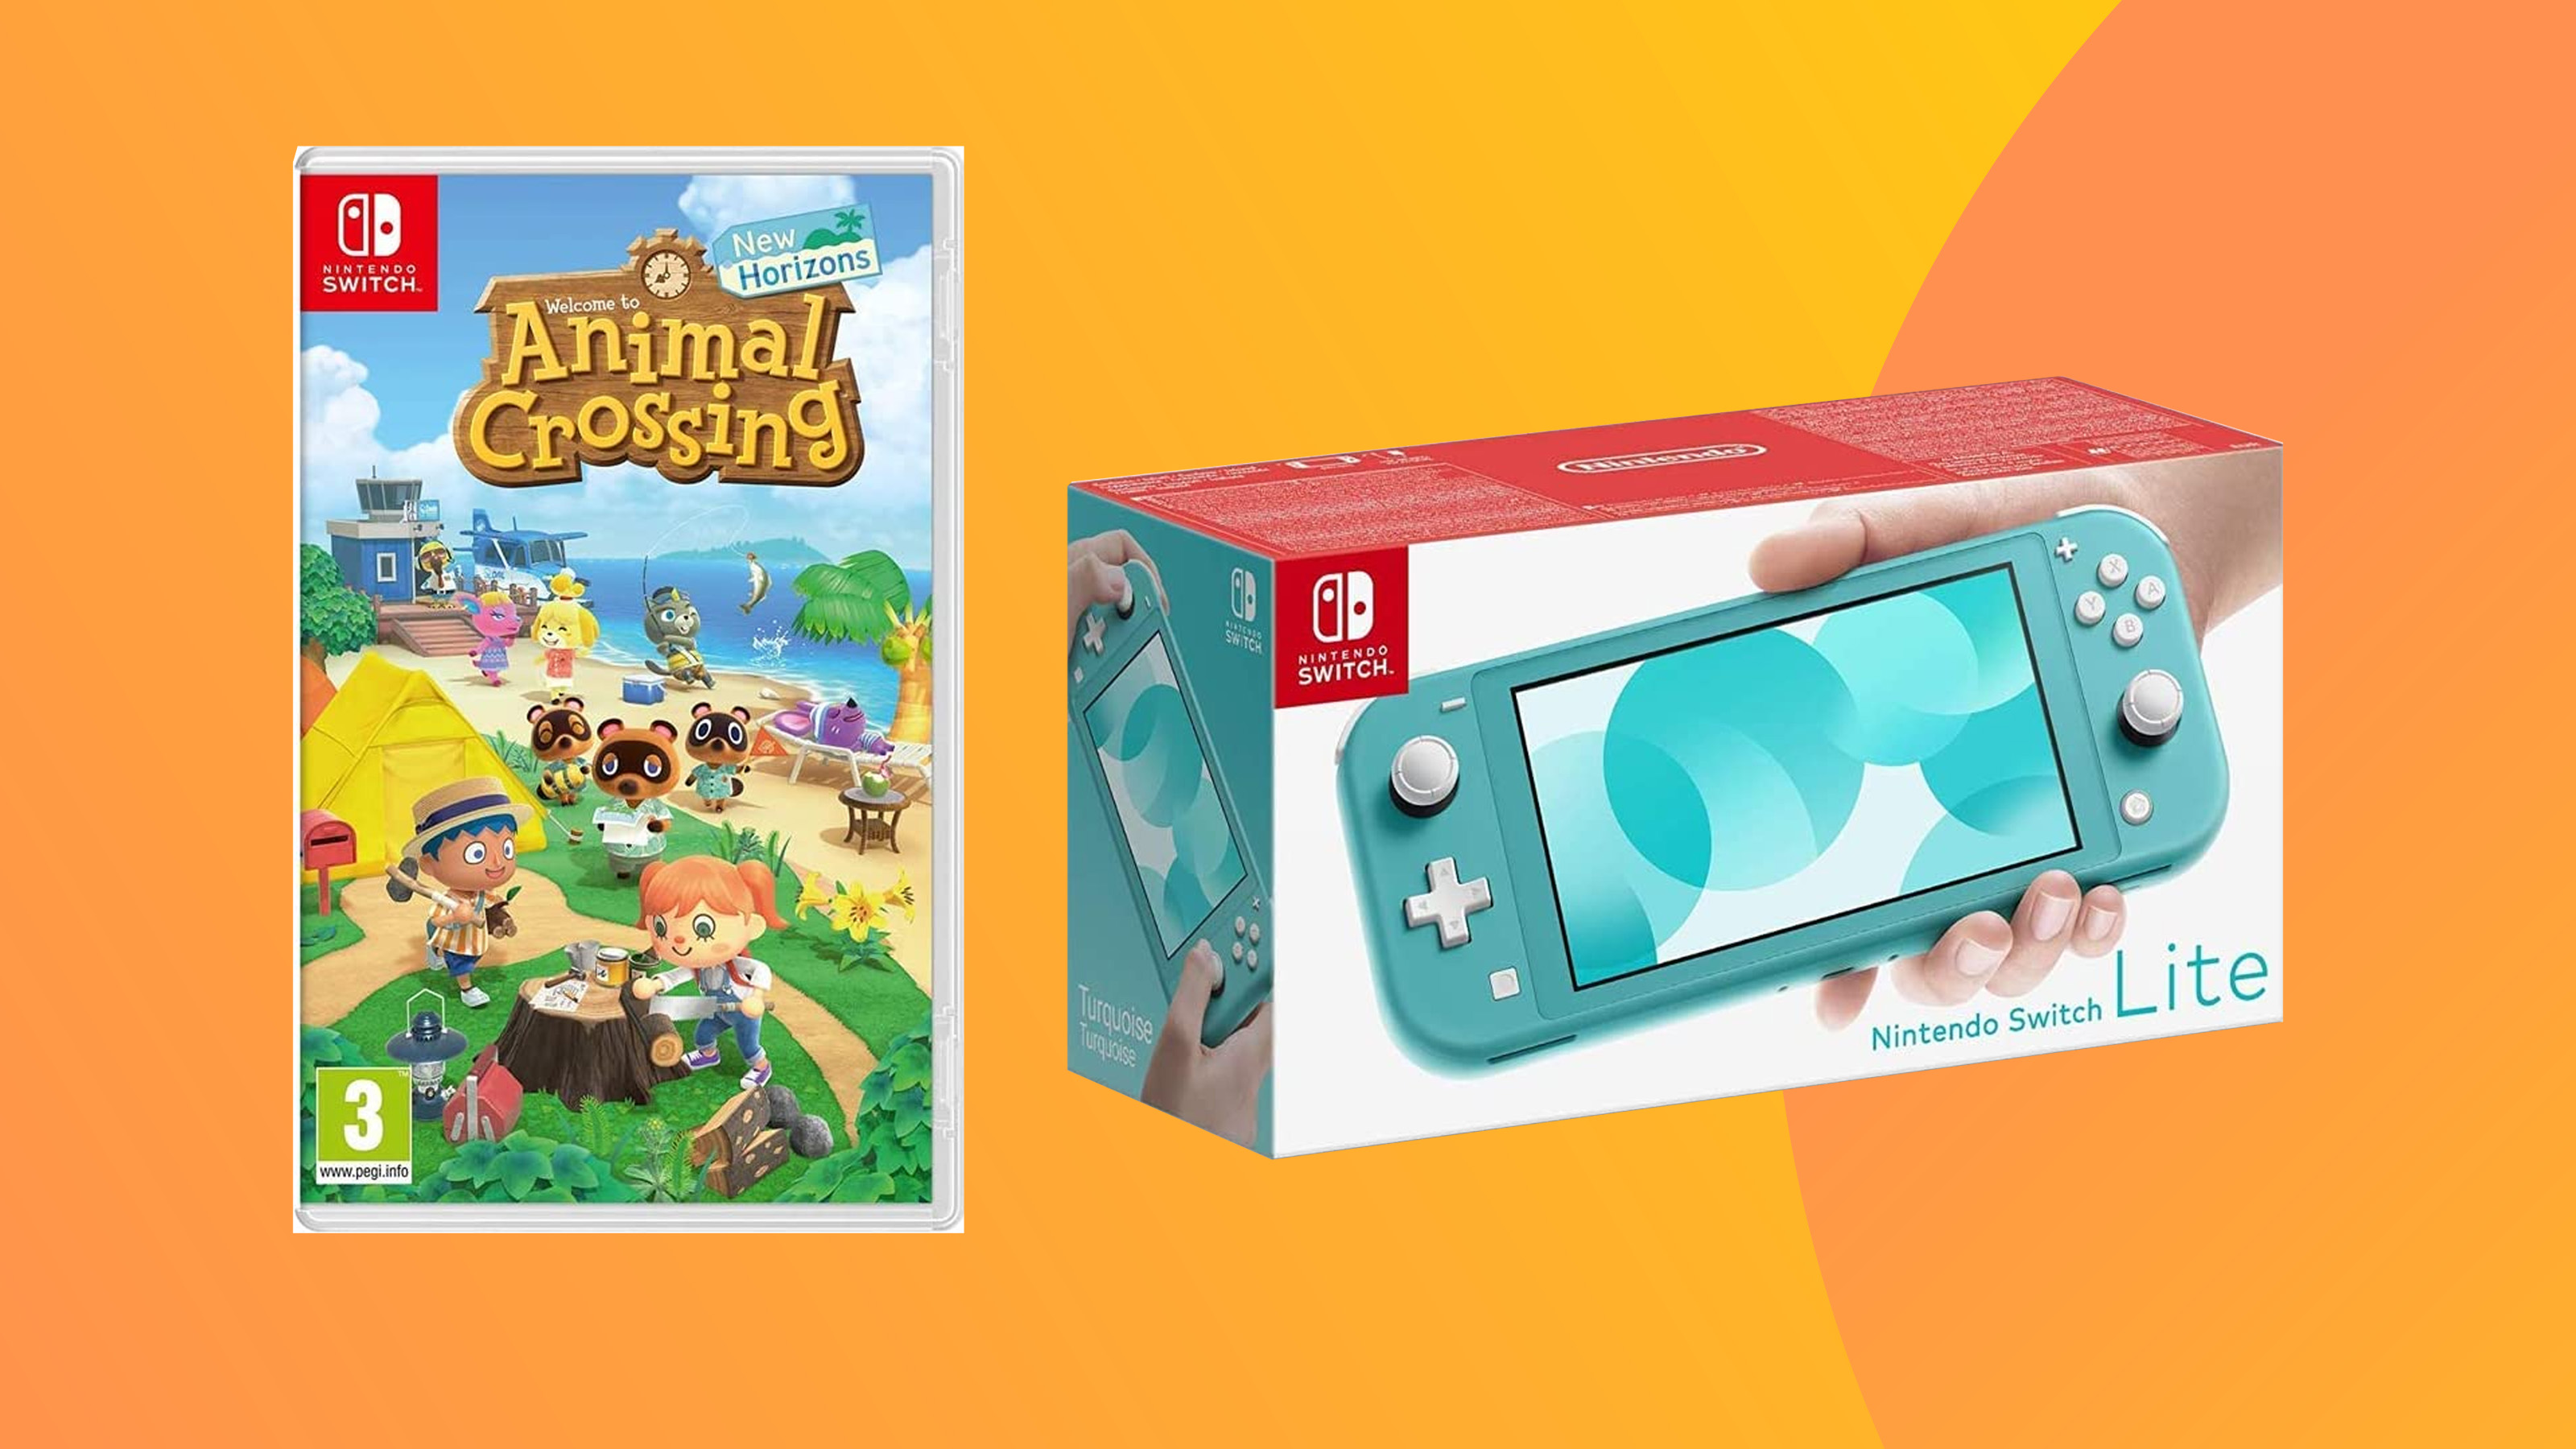 A product shot of the blue Nintendo Switch Lite and Animal Crossing on a colourful background